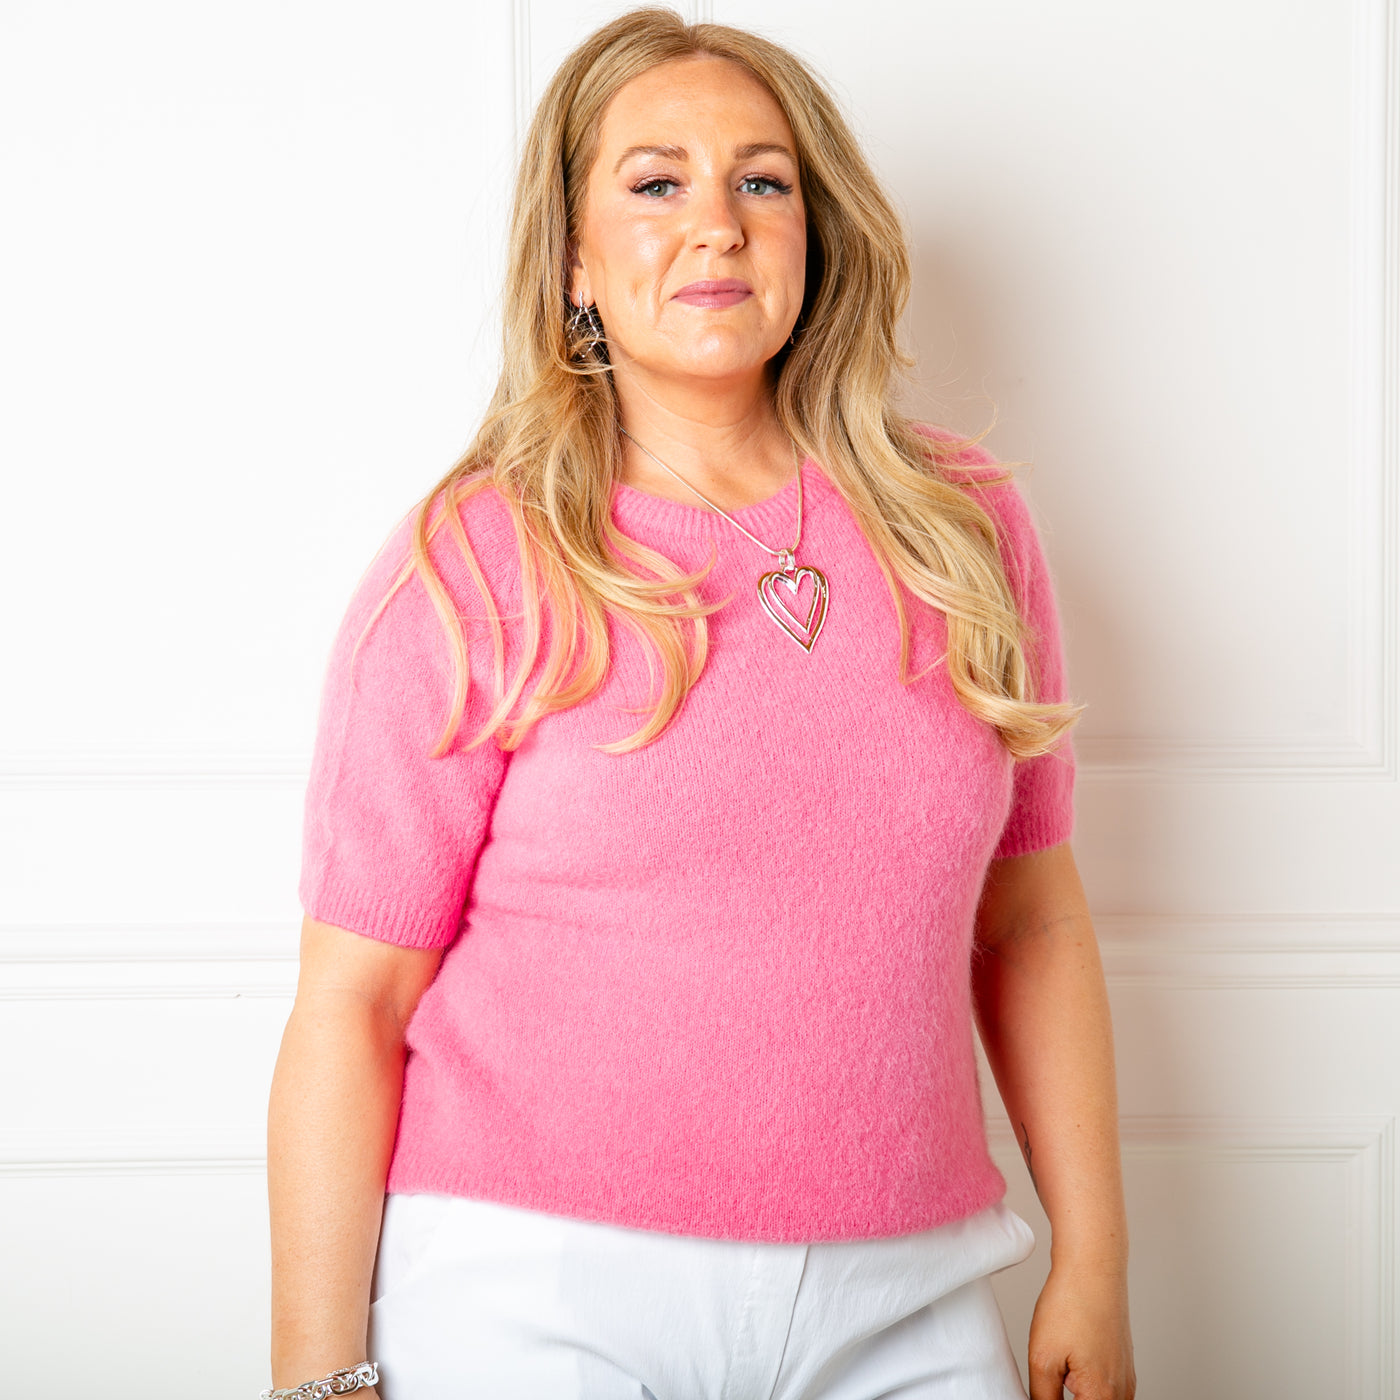 The watermelon pink Suri Alpaca Mix Short Sleeve Jumper with ribbed edges on the cuffs, neck and bottom hemline